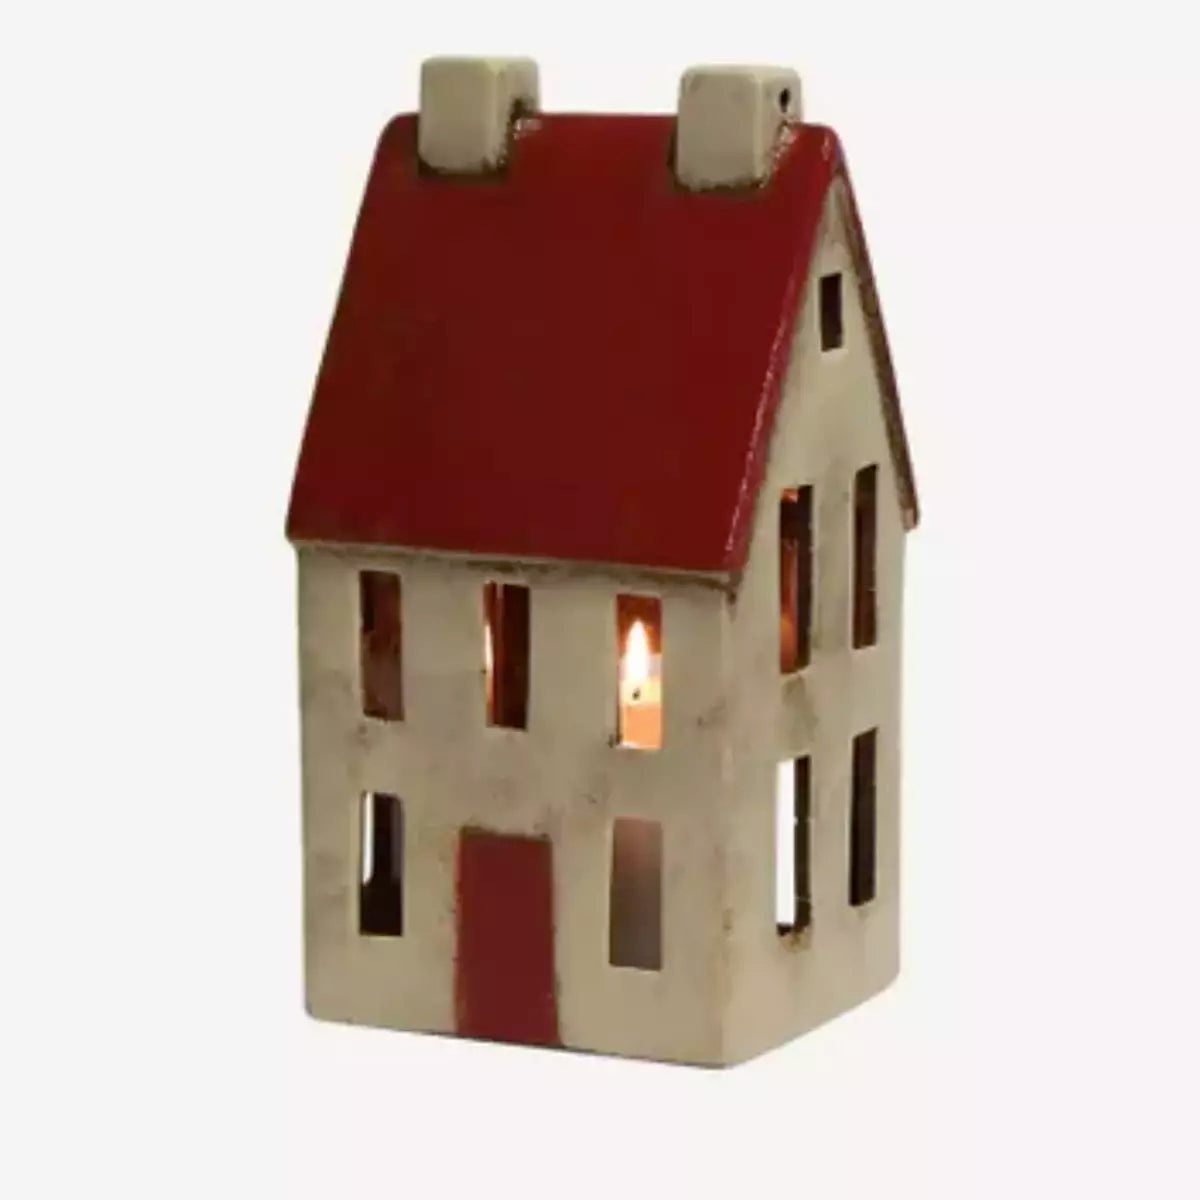 A French Country Collections Christmas Village Tall Chalet candle holder with a red roof, made of ceramic.